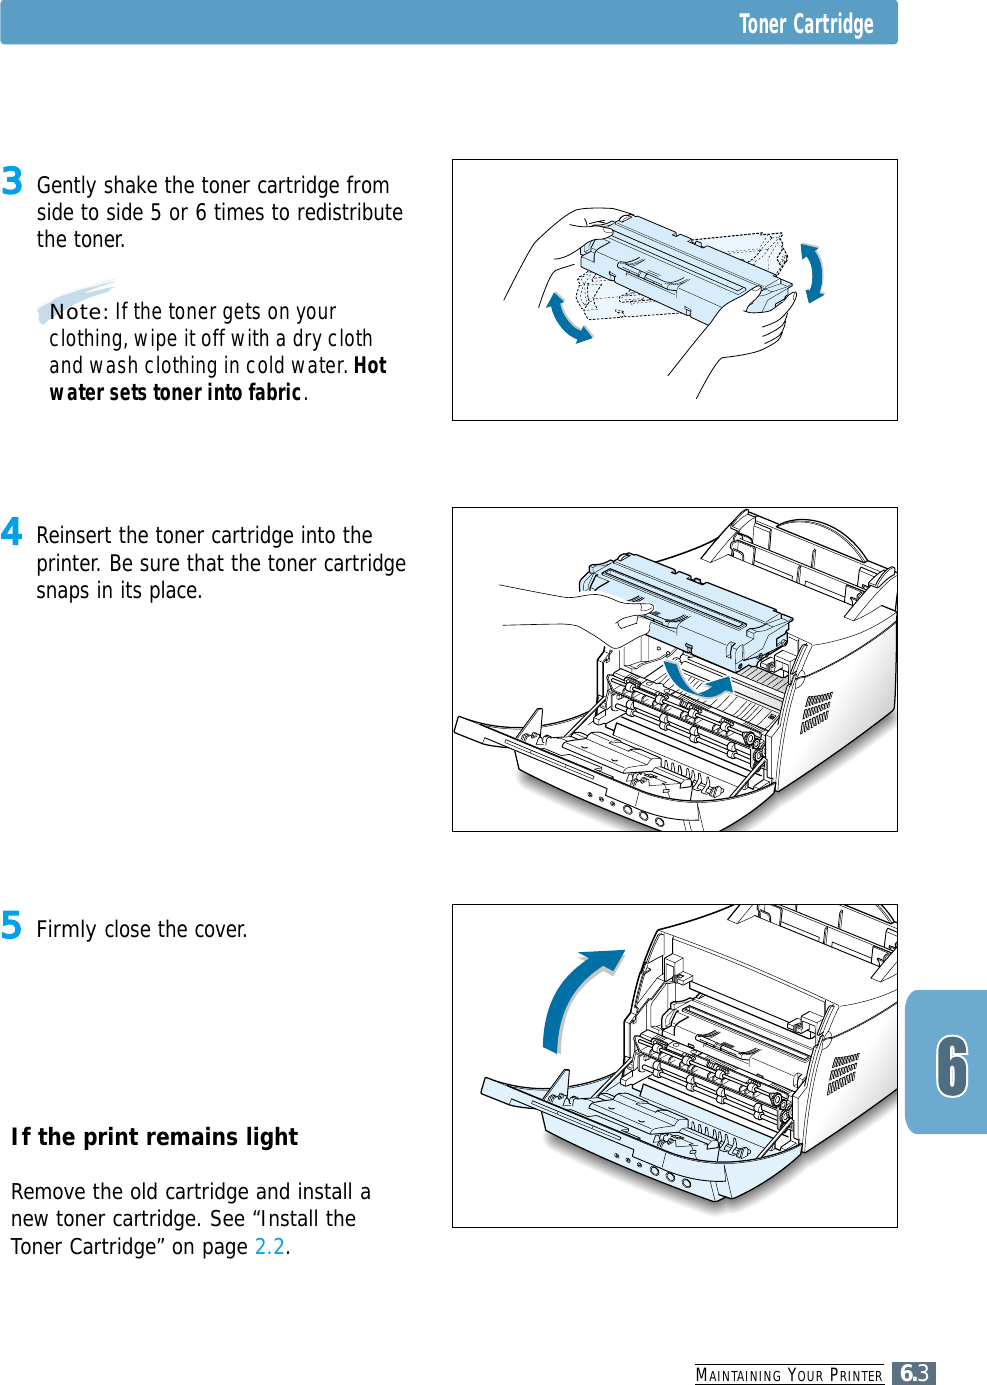 MAINTAINING YOUR PRINTER6.3Toner Cartridge3Gently shake the toner cartridge fromside to side 5 or 6 times to redistributethe toner.4Reinsert the toner cartridge into theprinter. Be sure that the toner cartridgesnaps in its place.5Firmly close the cover.If the print remains light Remove the old cartridge and install anew toner cartridge. See “Install theToner Cartridge” on page 2.2.Note: If the toner gets on yourclothing, wipe it off with a dry clothand wash clothing in cold water. Hotwater sets toner into fabric.